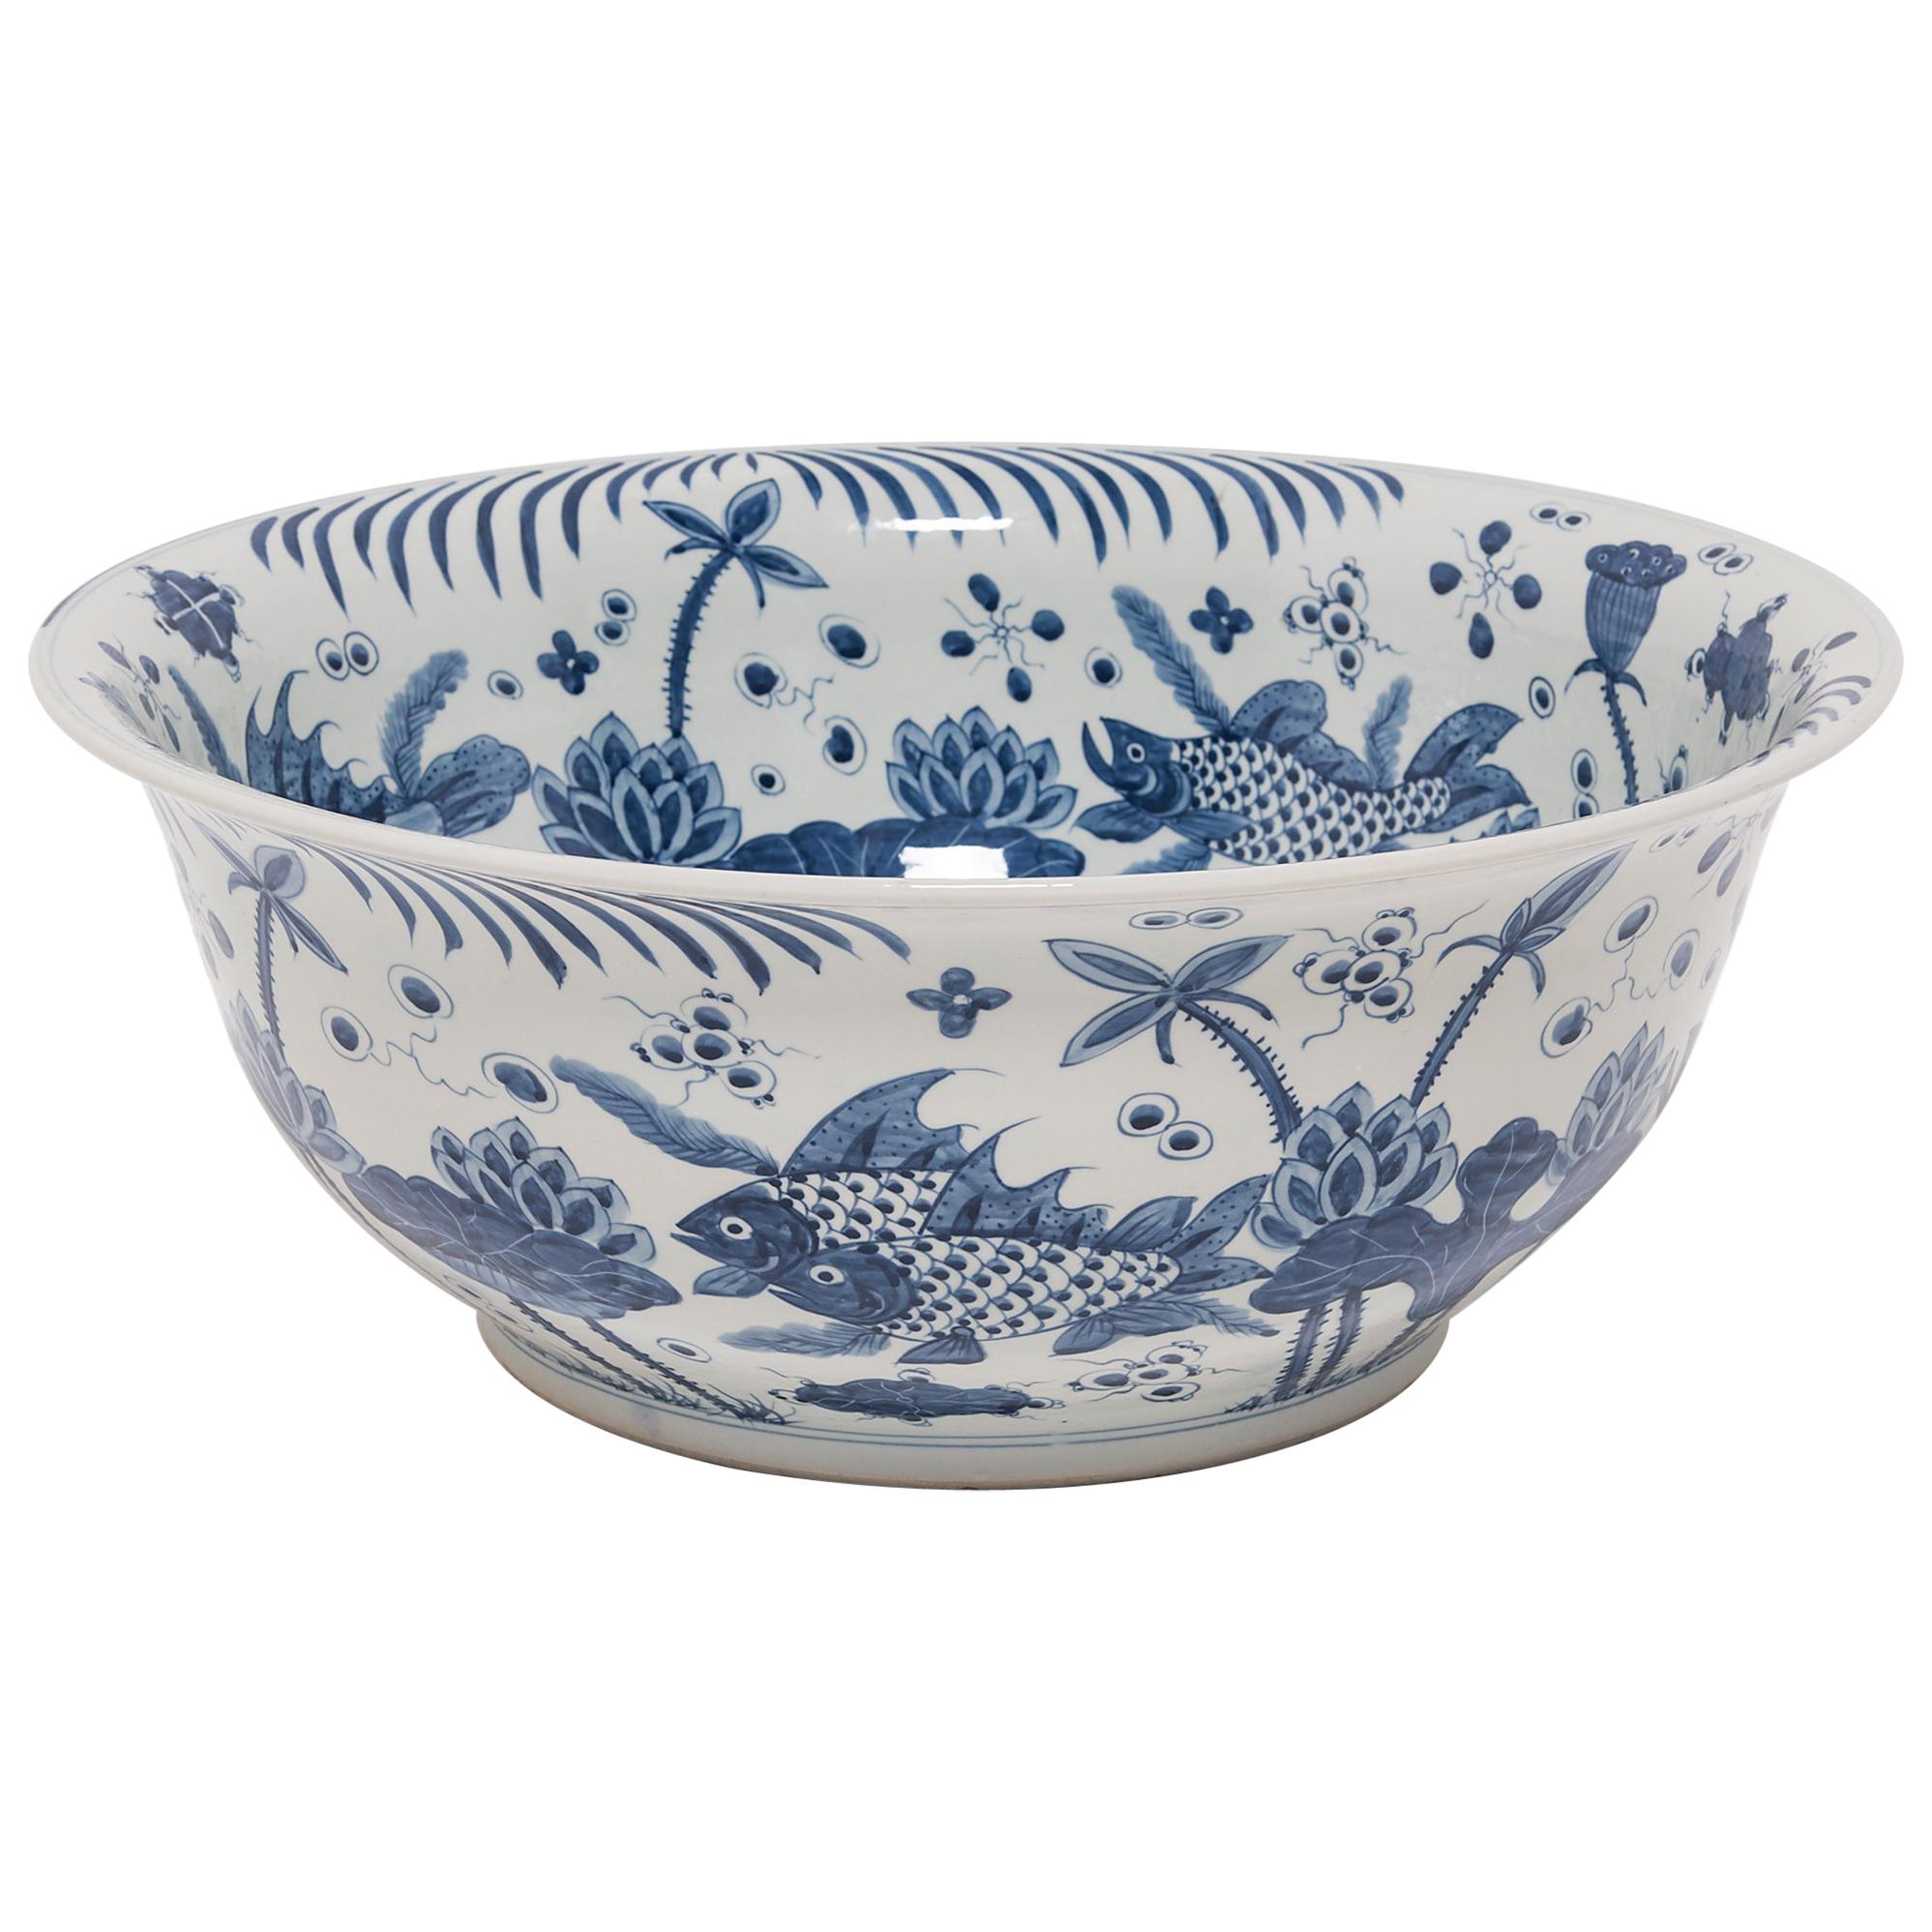 Monumental Chinese Blue and White Ocean Bowl